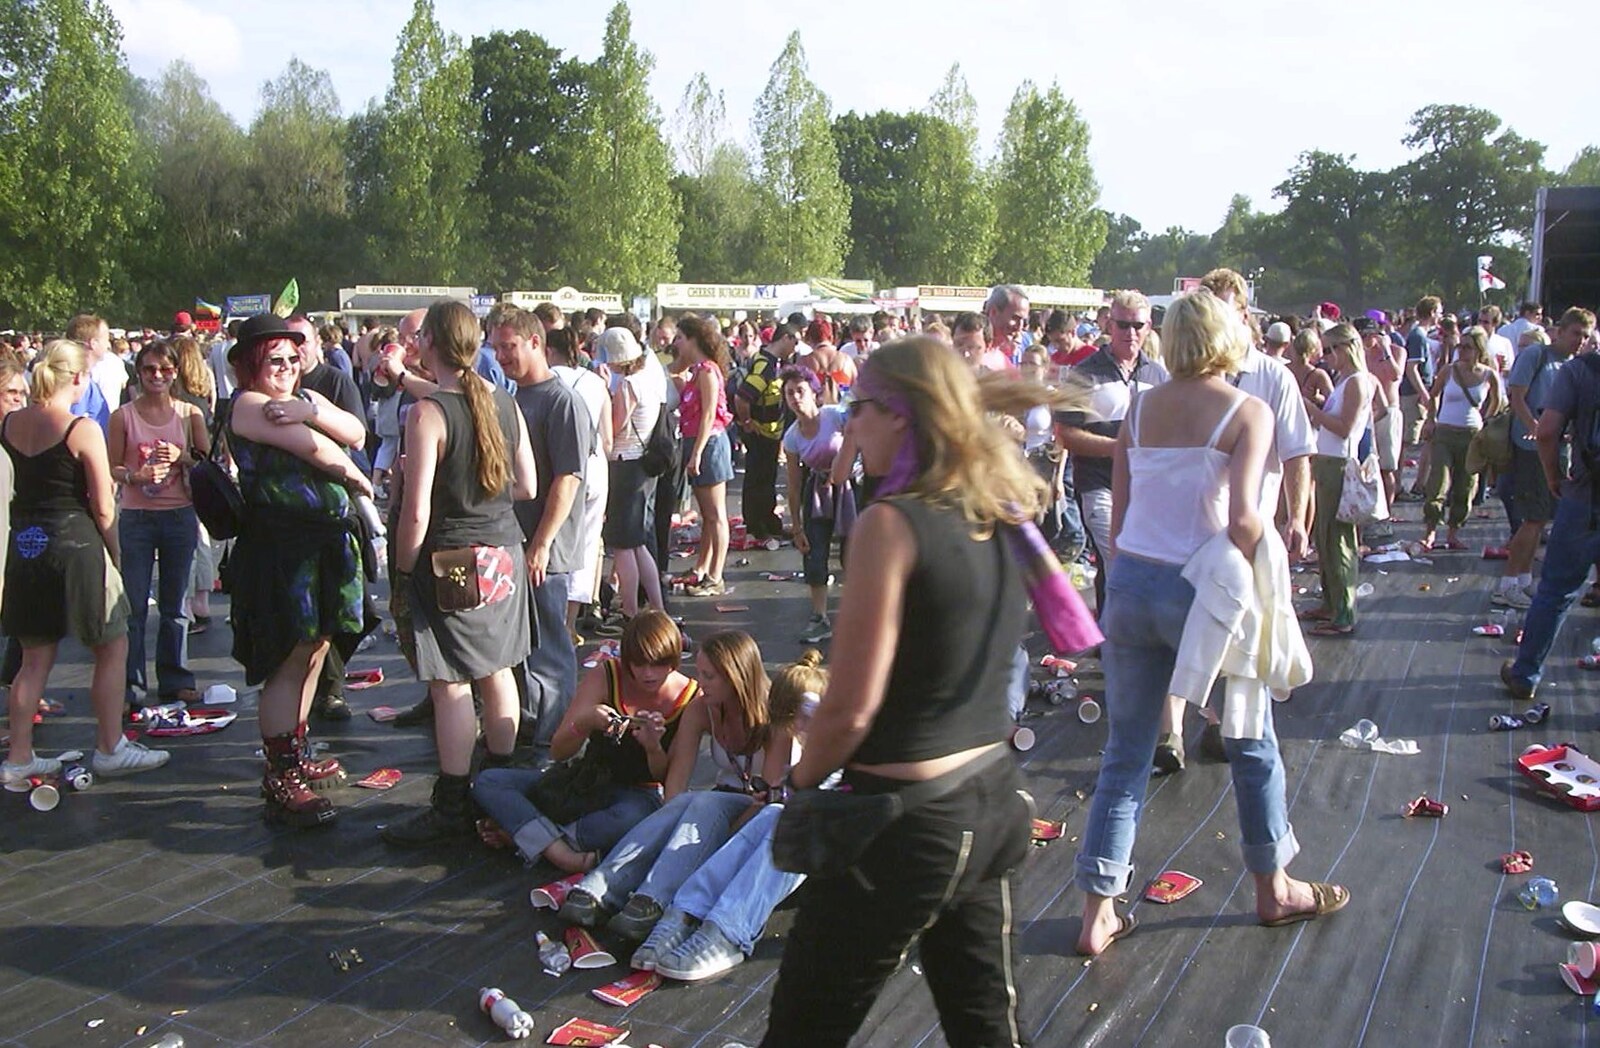 The crowd breaks up from V Festival 2003, Hyland's Park, Chelmsford, Essex - 16th August 2003